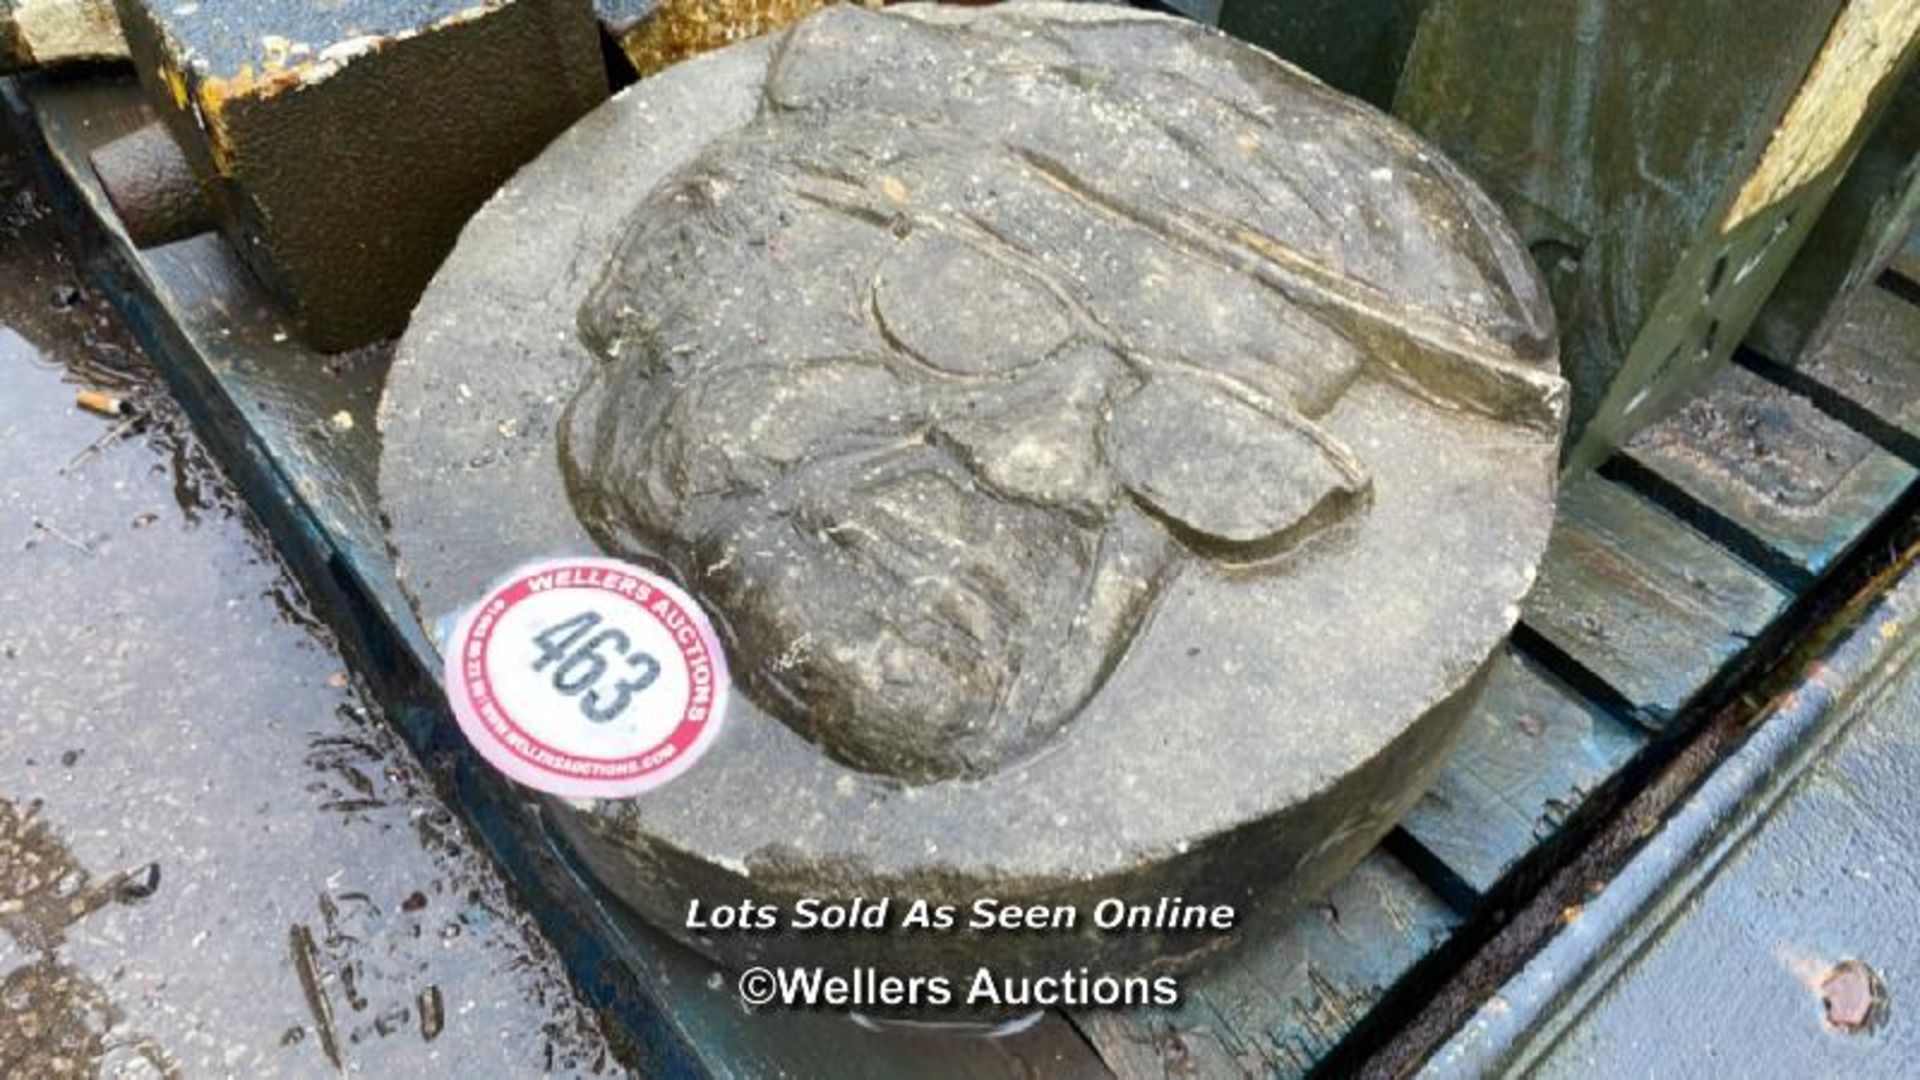 CARVED STONE PORTRAIT OF FRED DIBNAH (1938-2004), A WELL KNOWN STEEPLEJACK AND TV PERSONALITY FROM